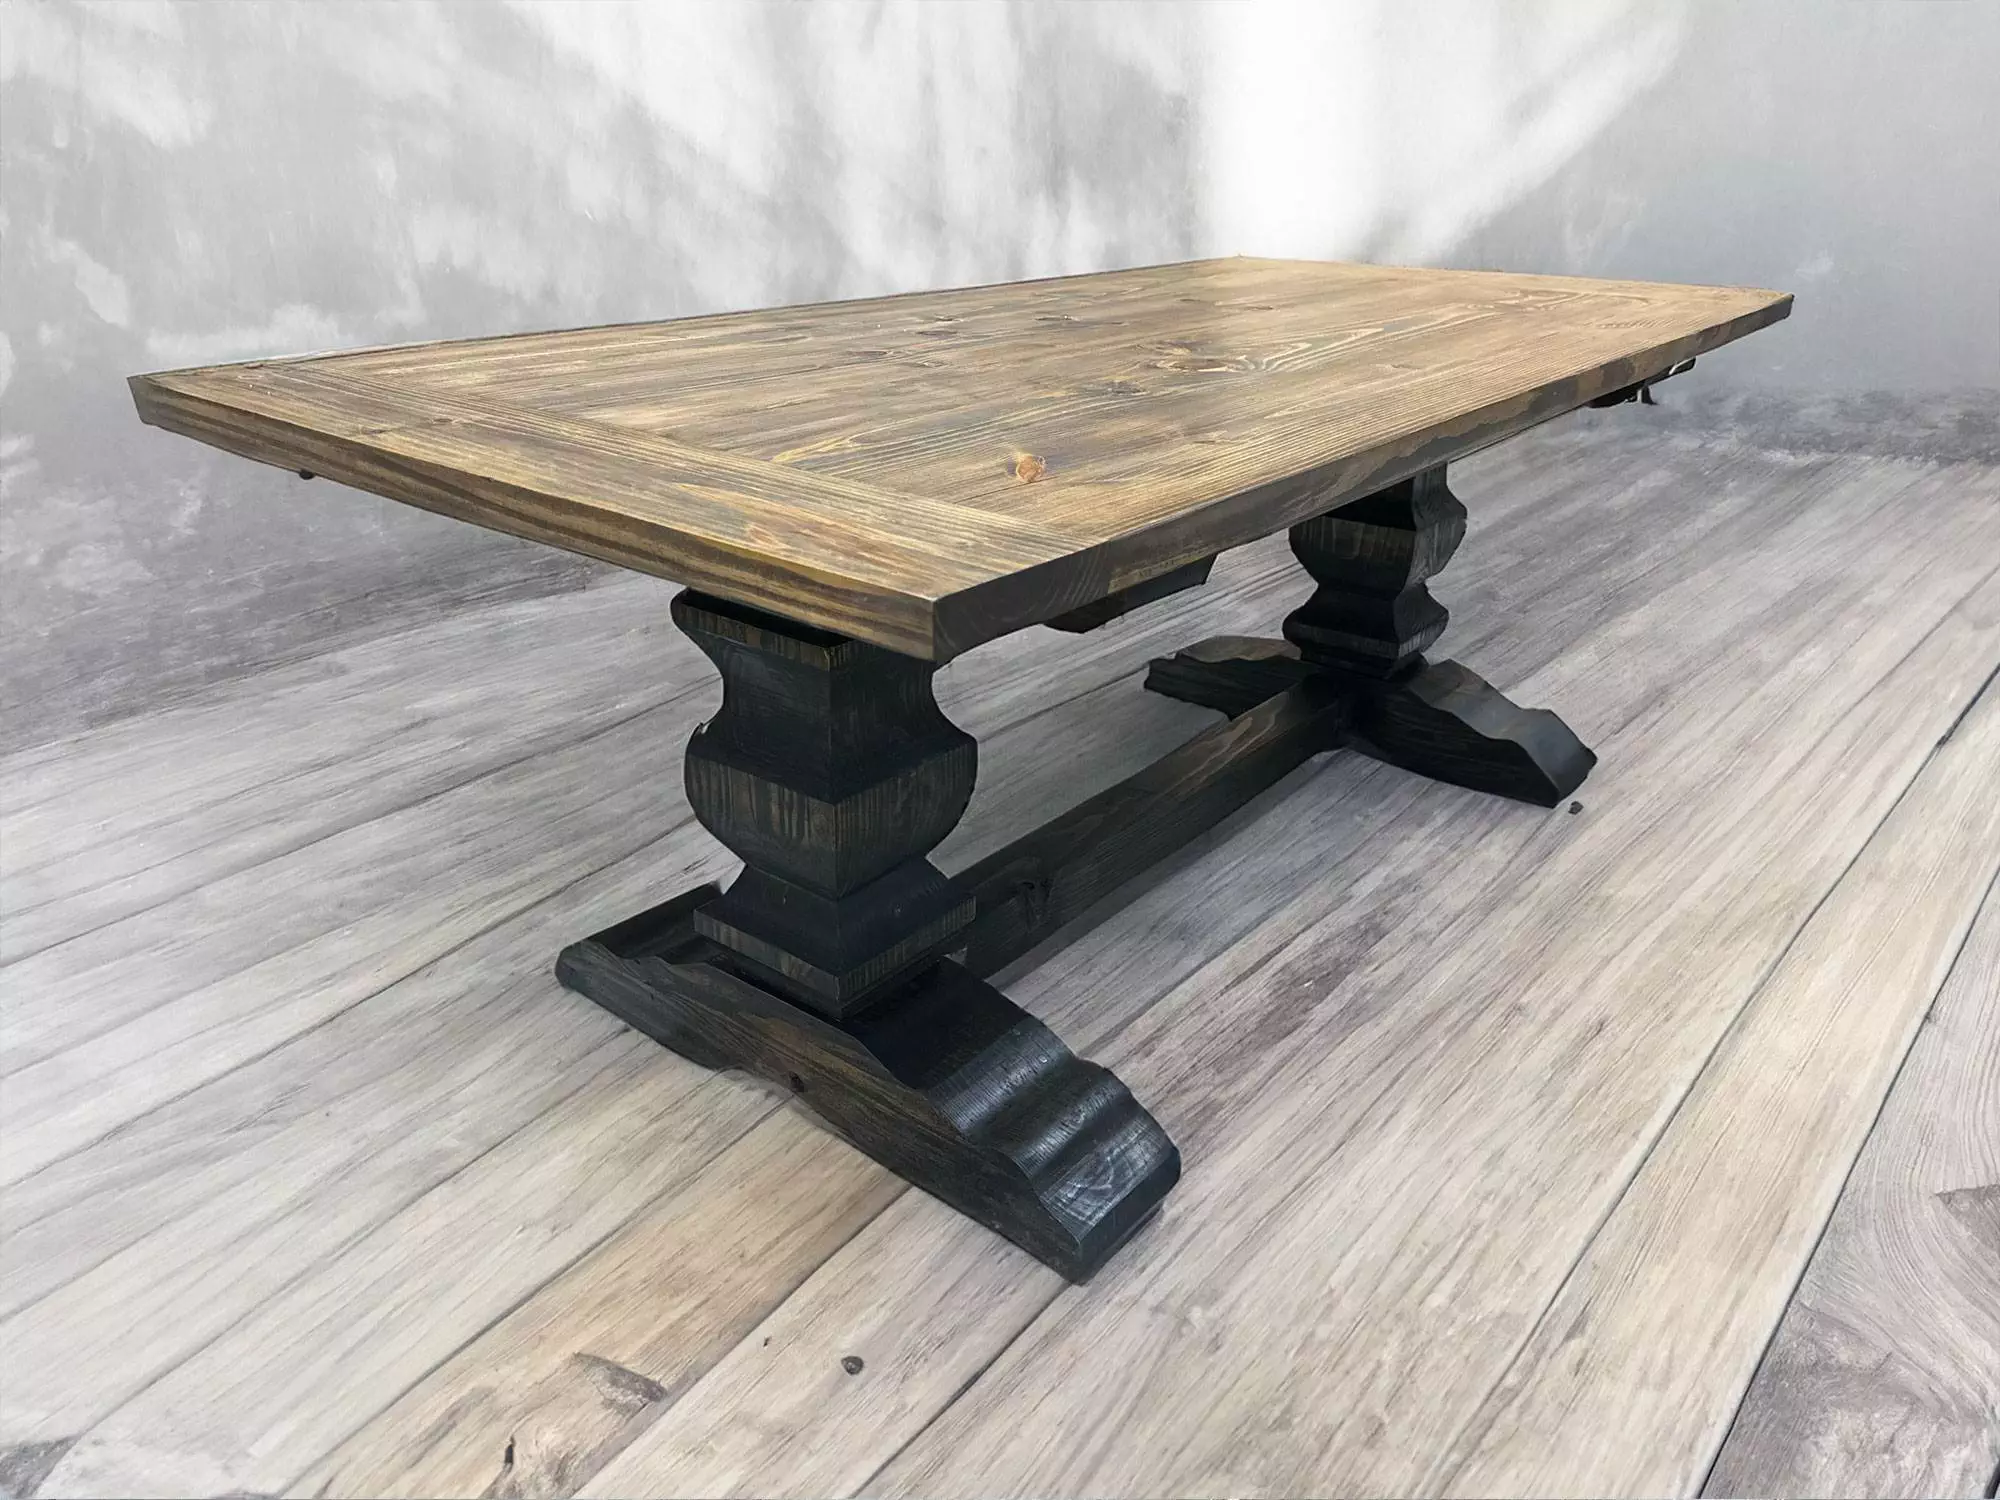 Pedestal Leg Table in Solid Wood